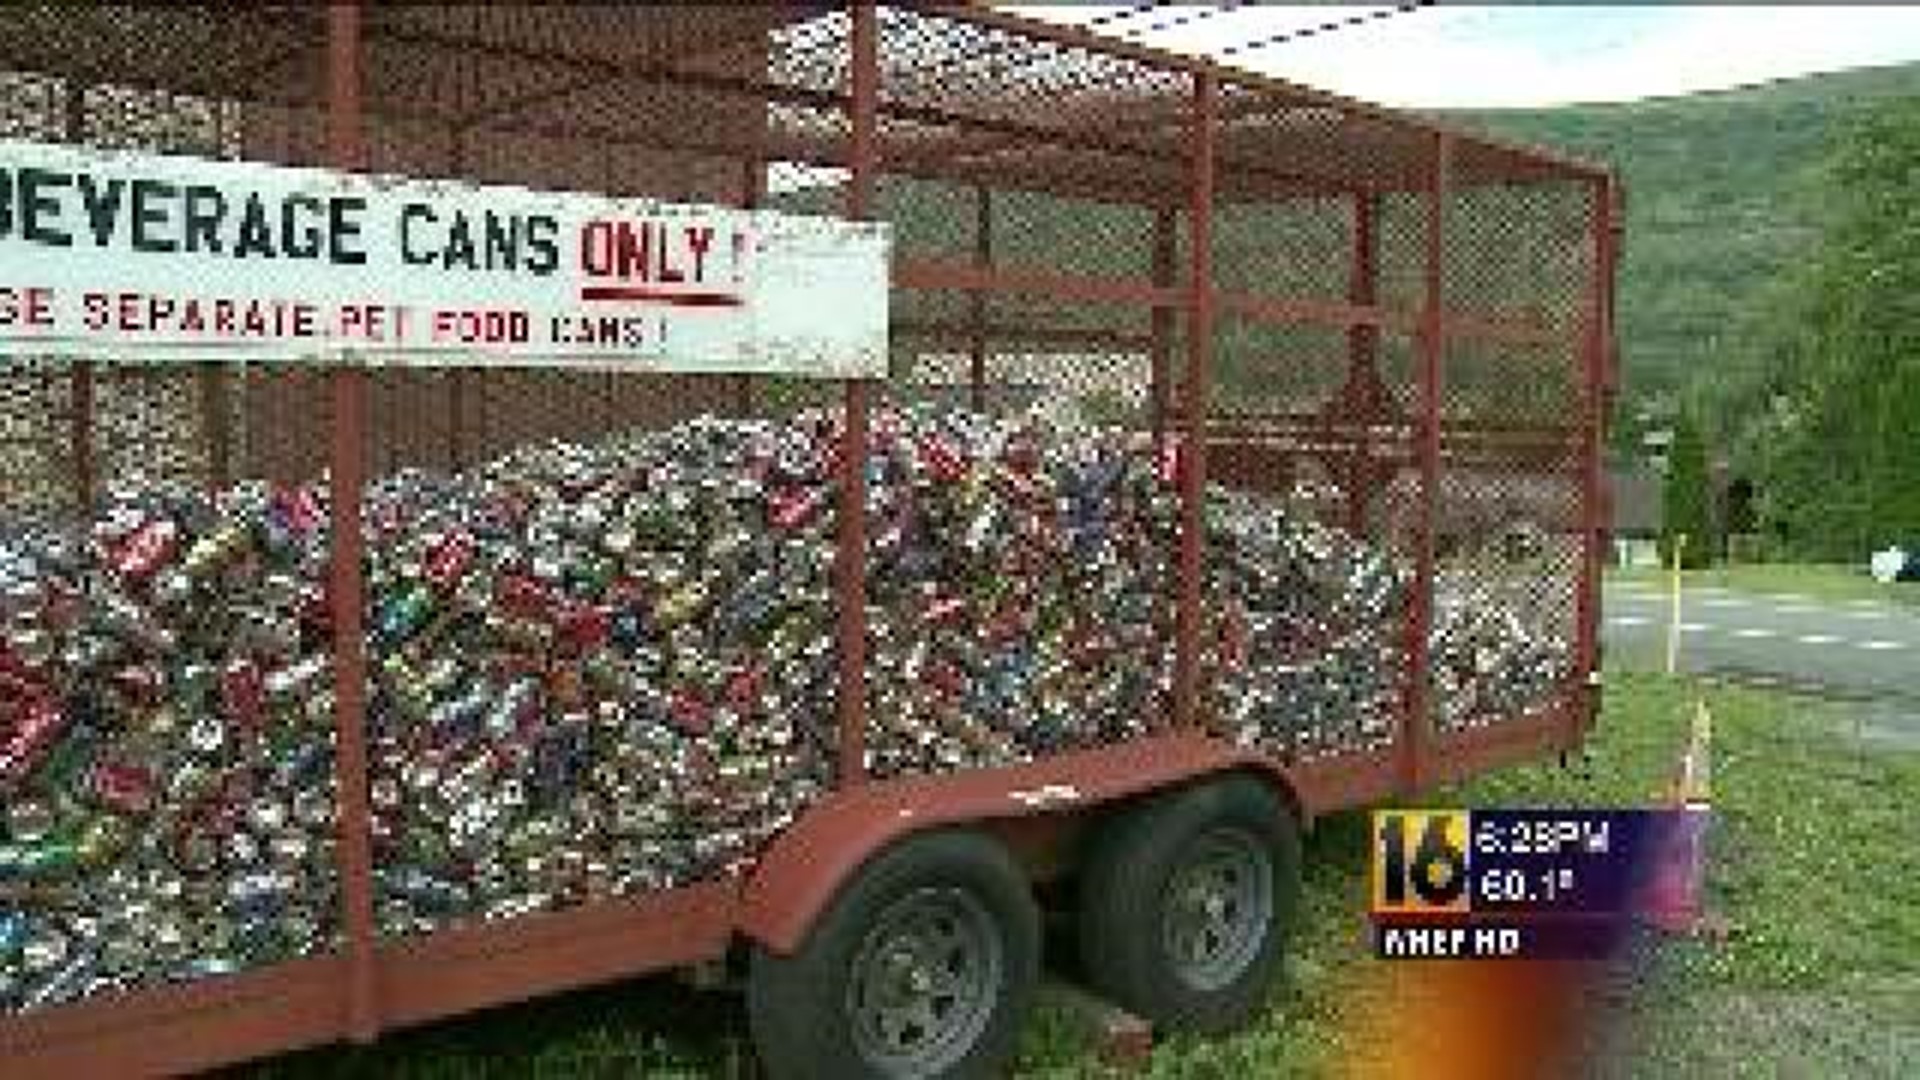 Fire Company Recycling For Nearly 30 Years